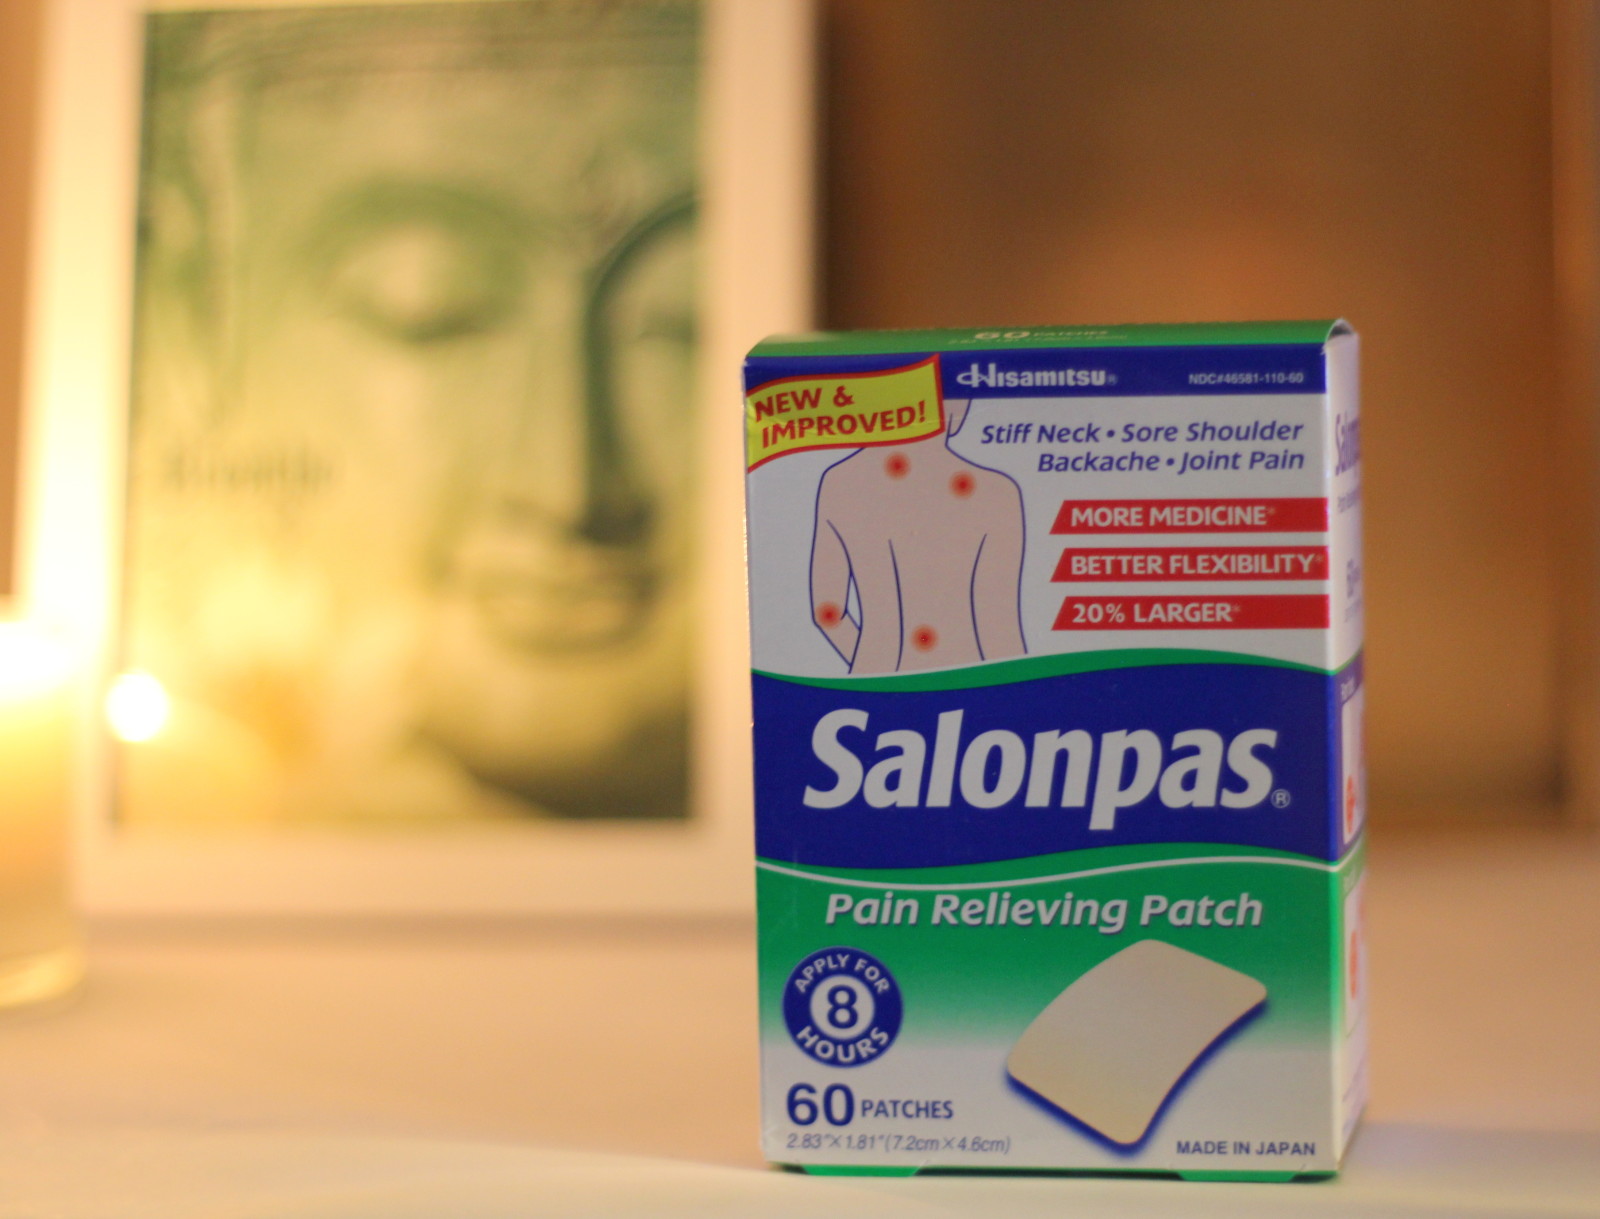 Review of Salonpas Patch